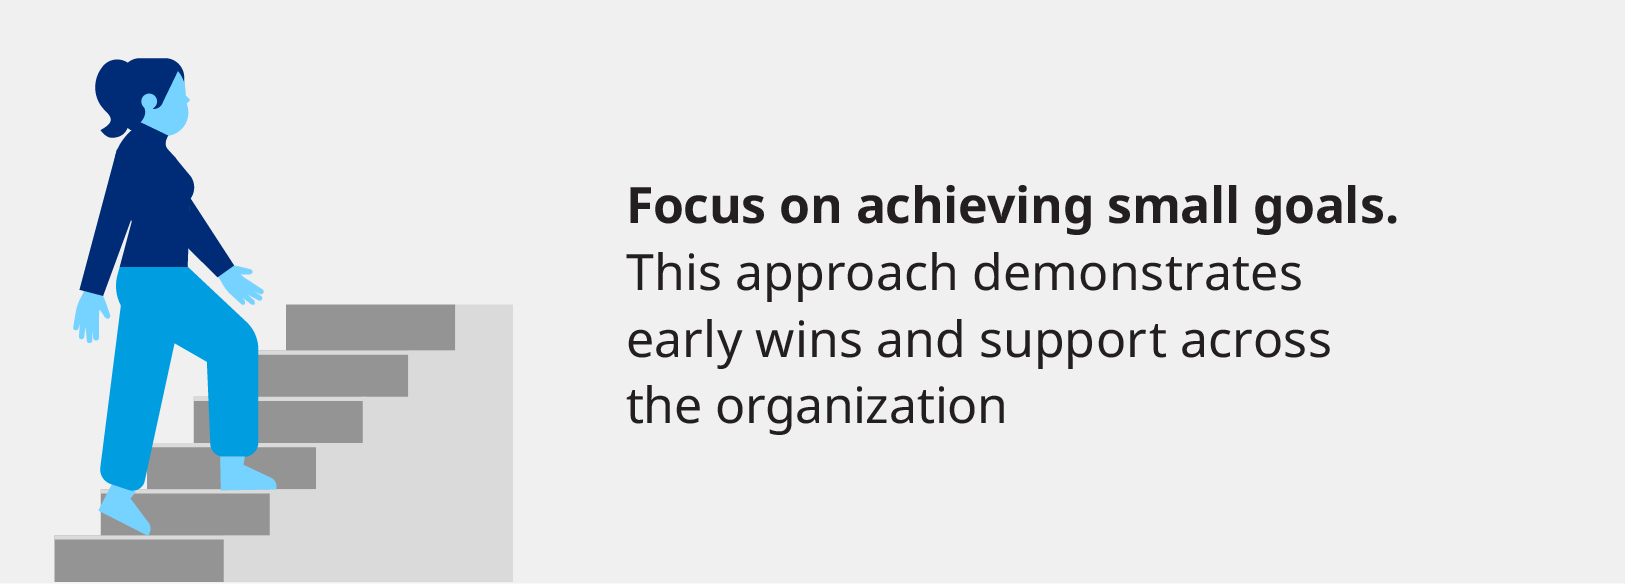 Focus on achieving small goals. This approach demonstrates early wins and support across the organization.